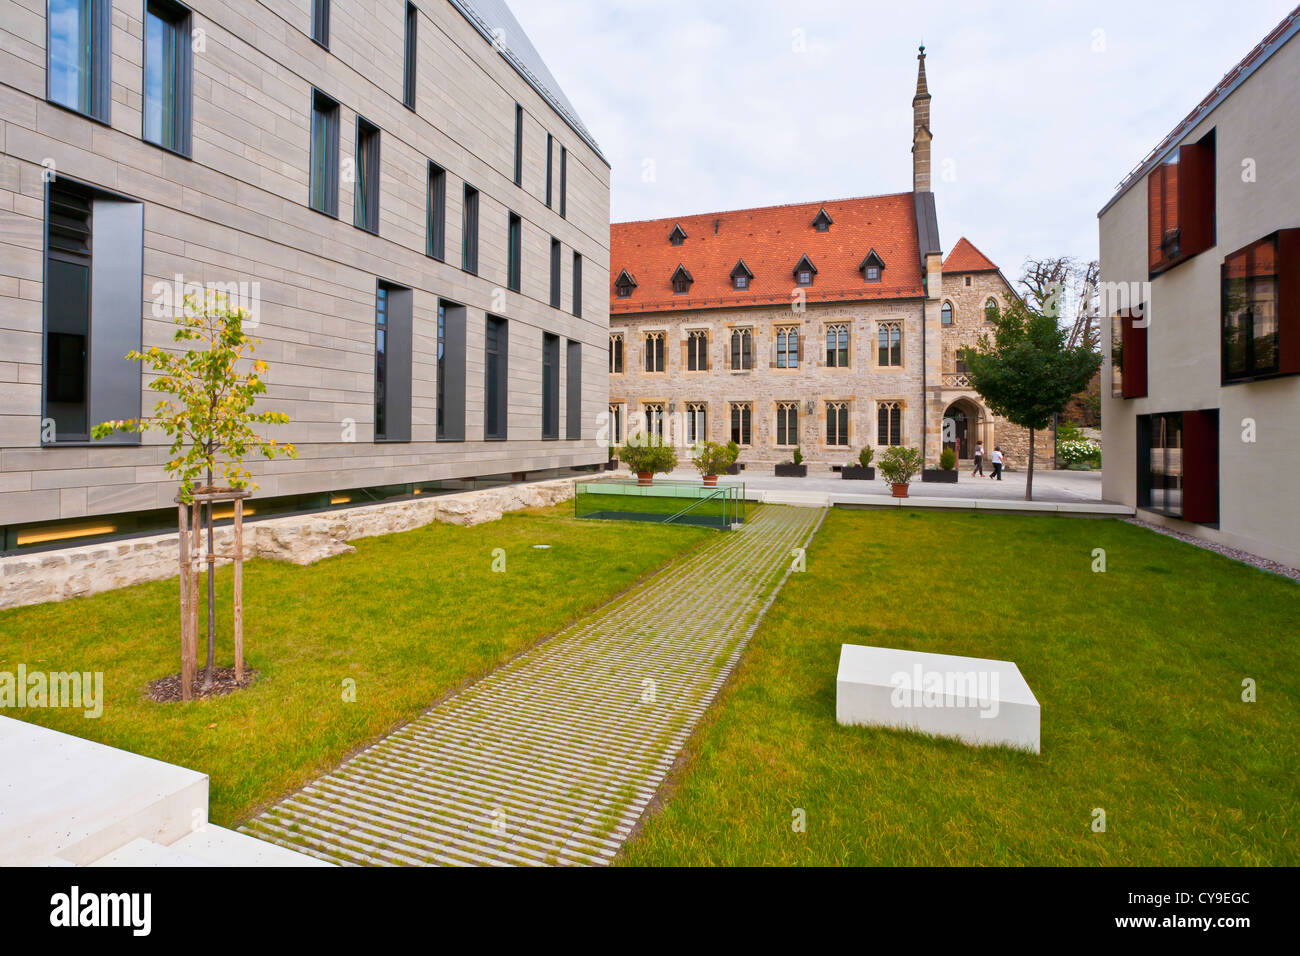 AUGUSTINIAN CHURCH, AUGUSTINERKIRCHE CHURCH AND ABBEY, CLOISTER, MEETING PLACE, ERFURT, THURINGIA, GERMANY Stock Photo